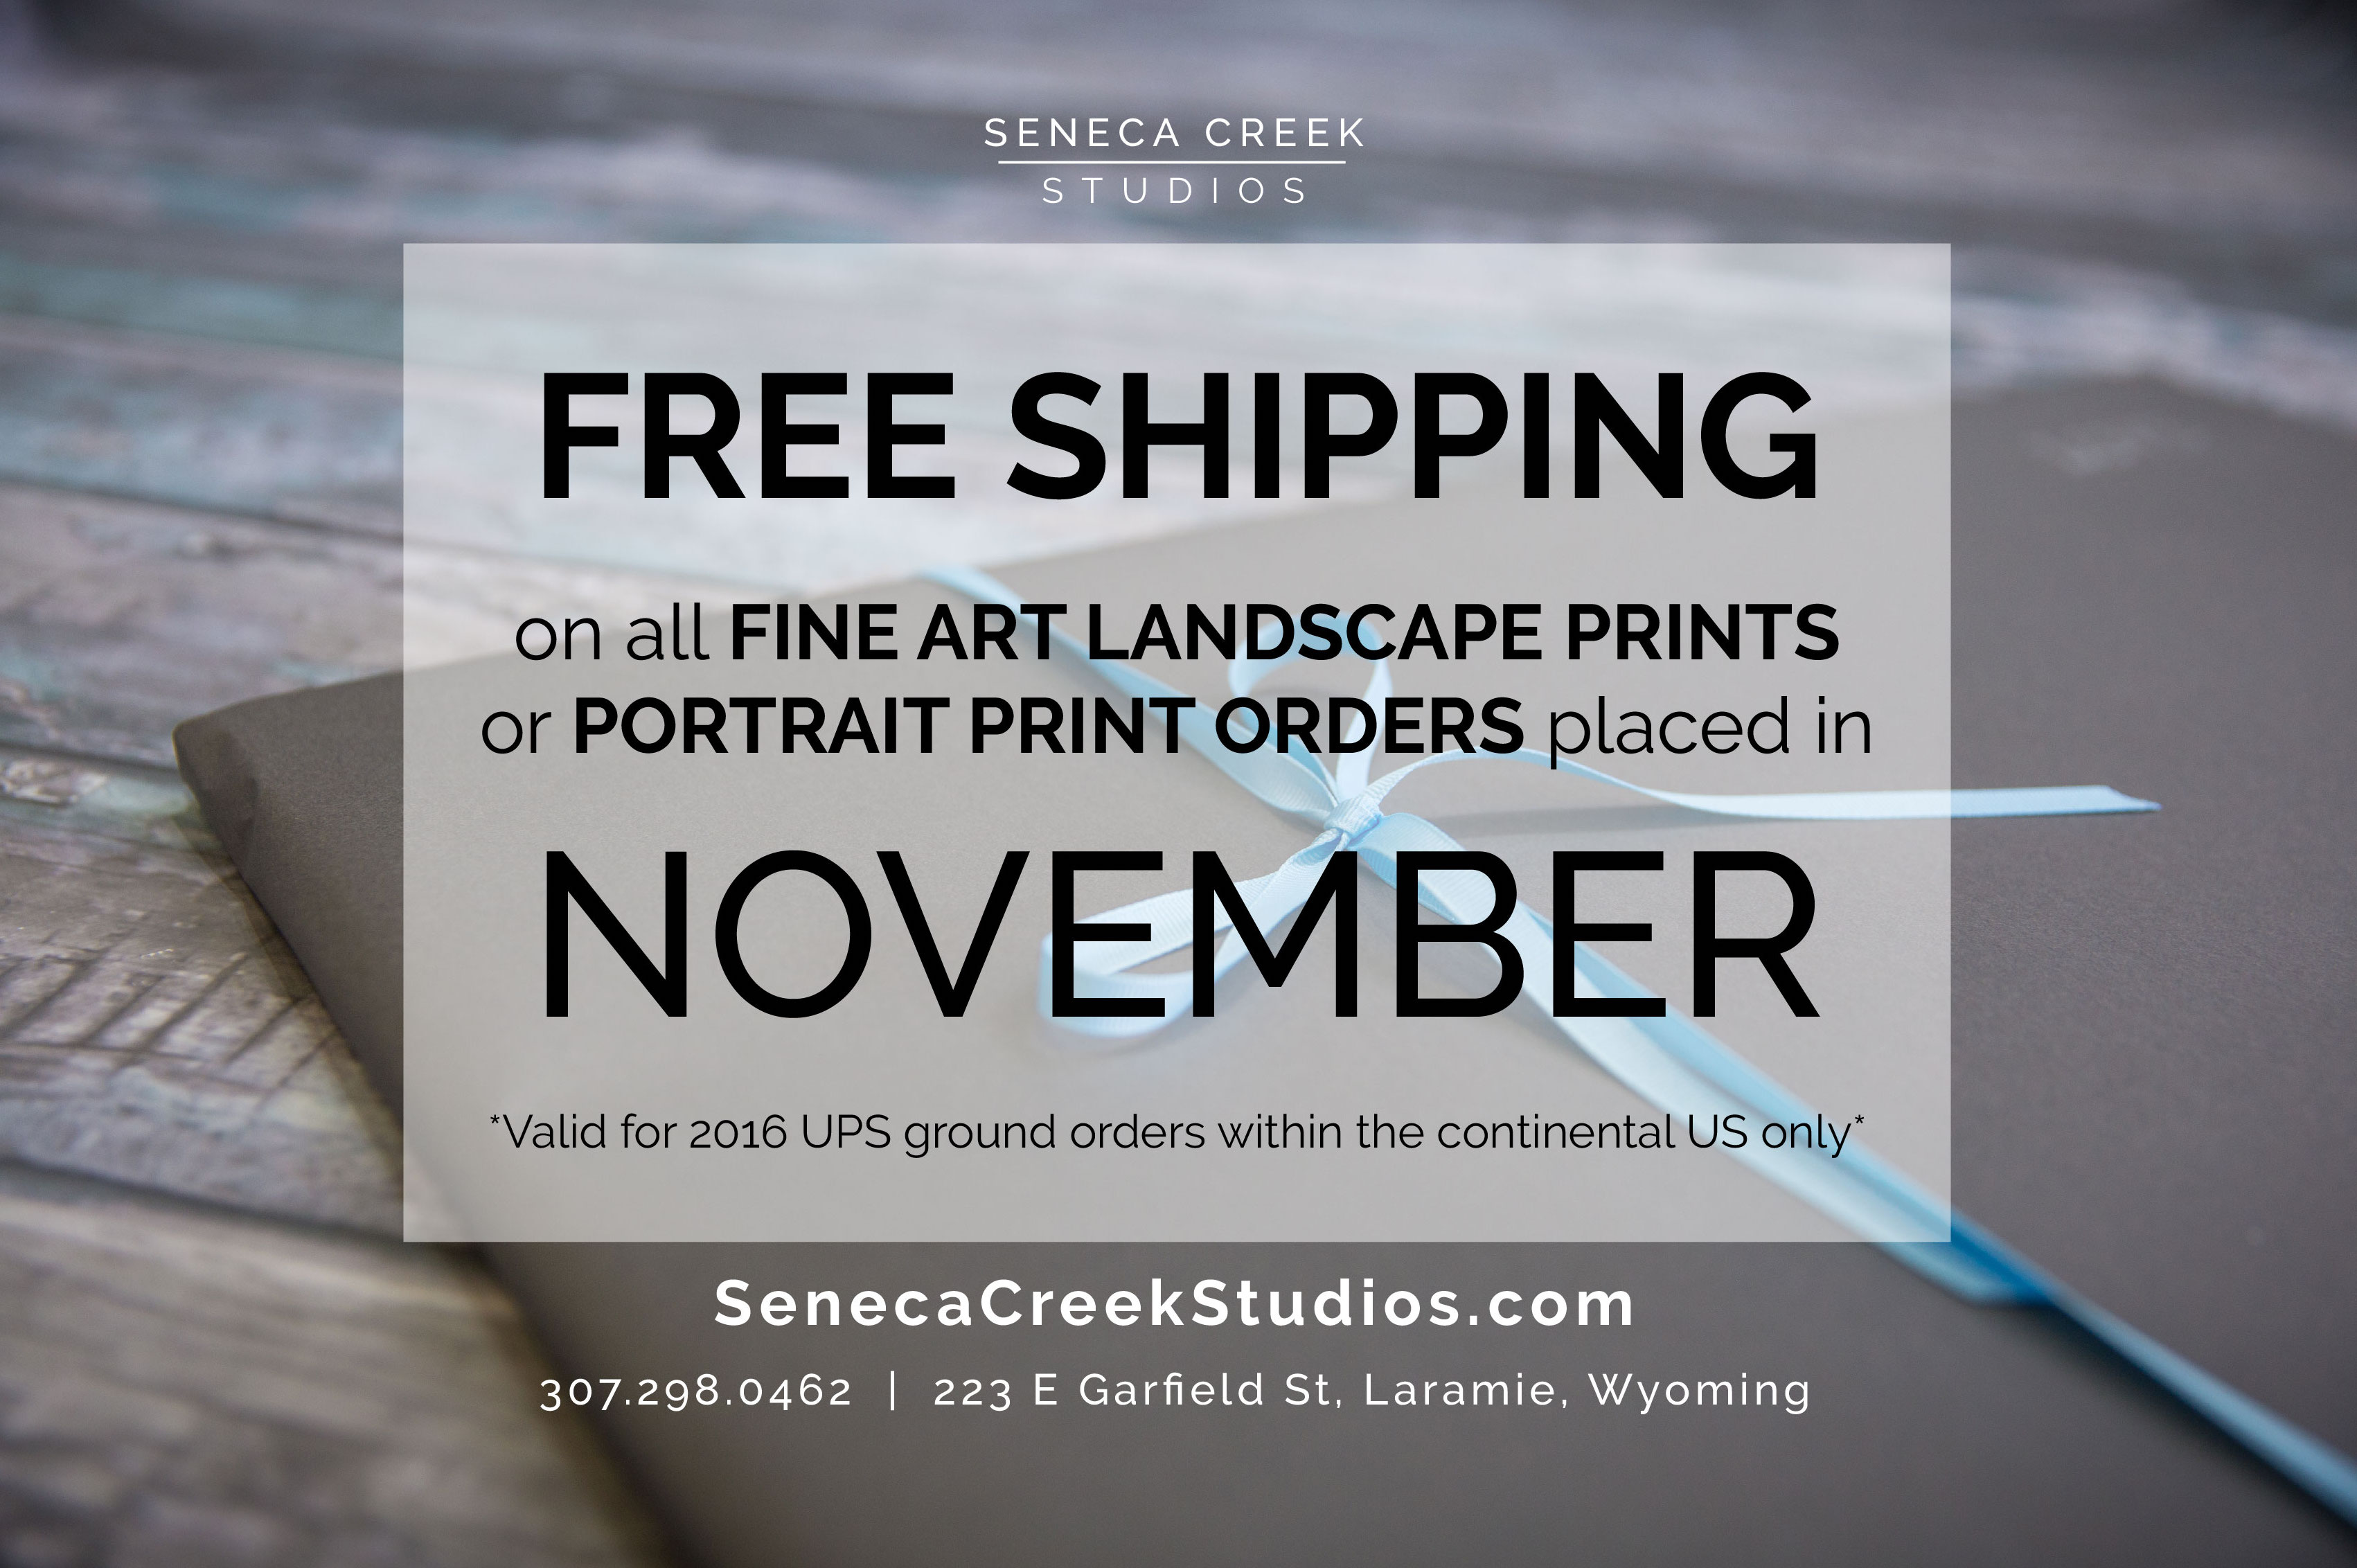 FREE SHIPPING on ALL fine art landscape or portrait print orders placed during the entire month of November! Valid for UPS ground orders within the continental US only.